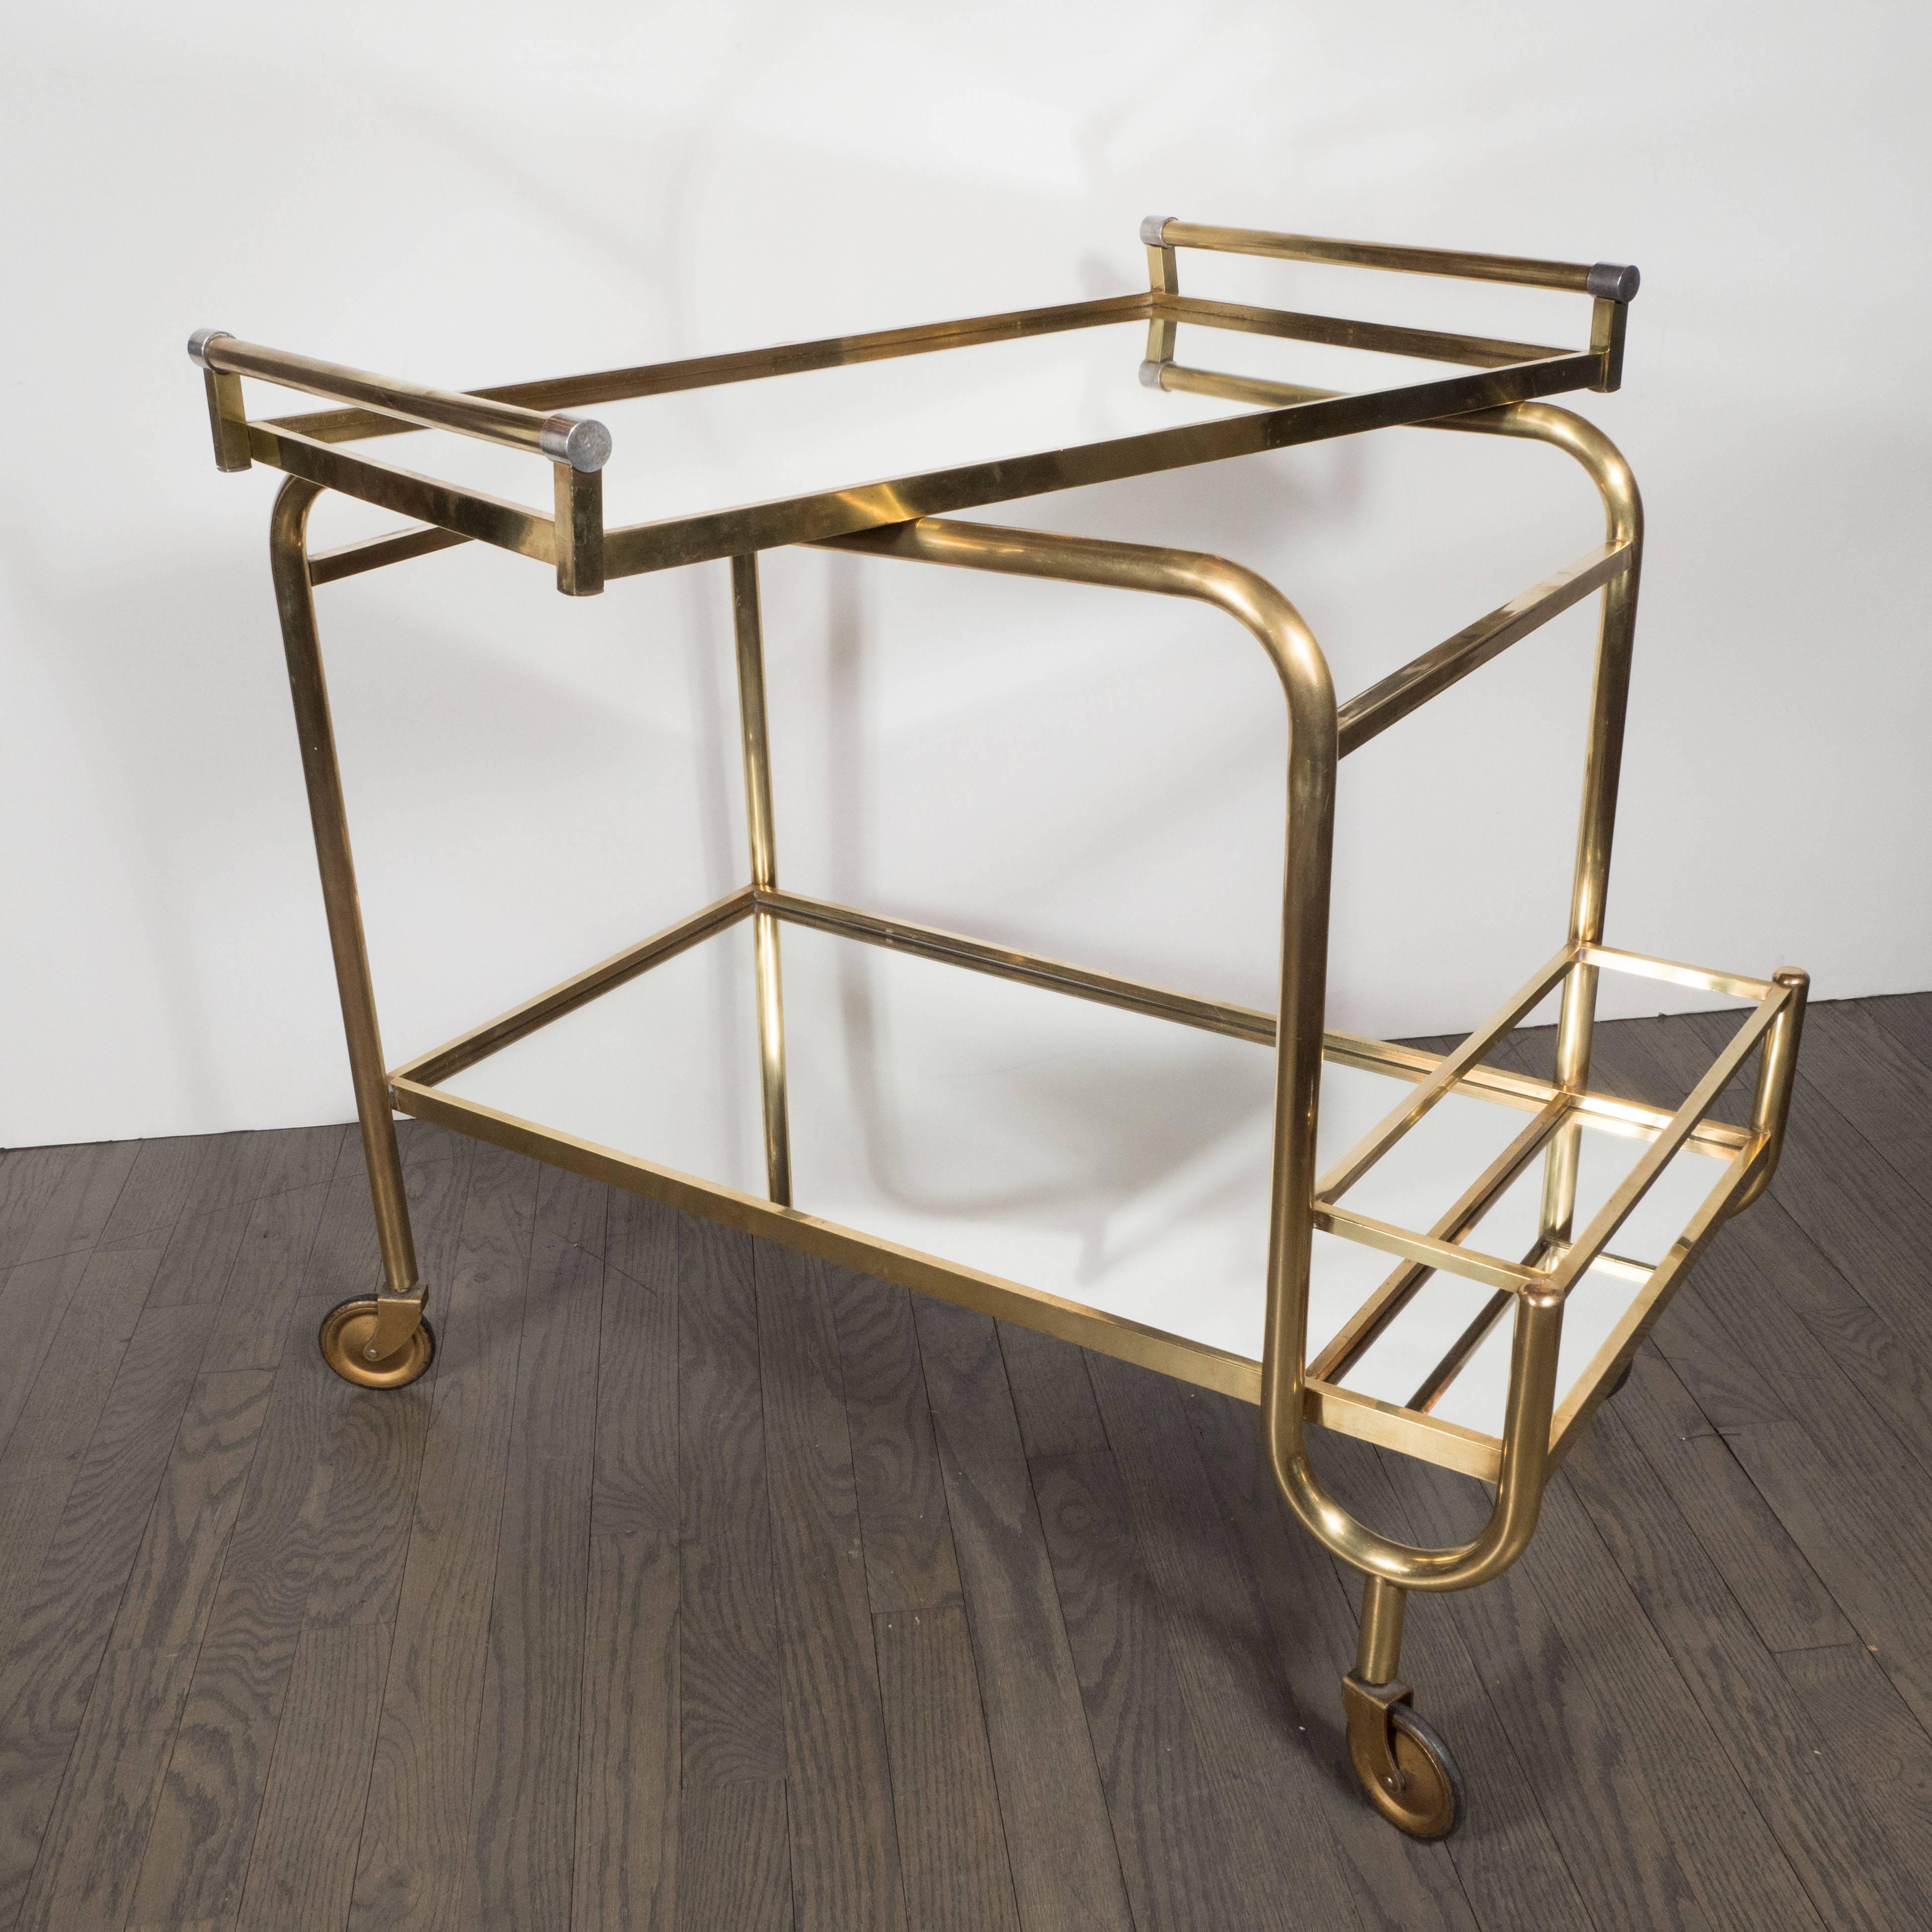 Italian Mid-Century Modern Brass and Mirrored Glass Bar Cart with Casters 1